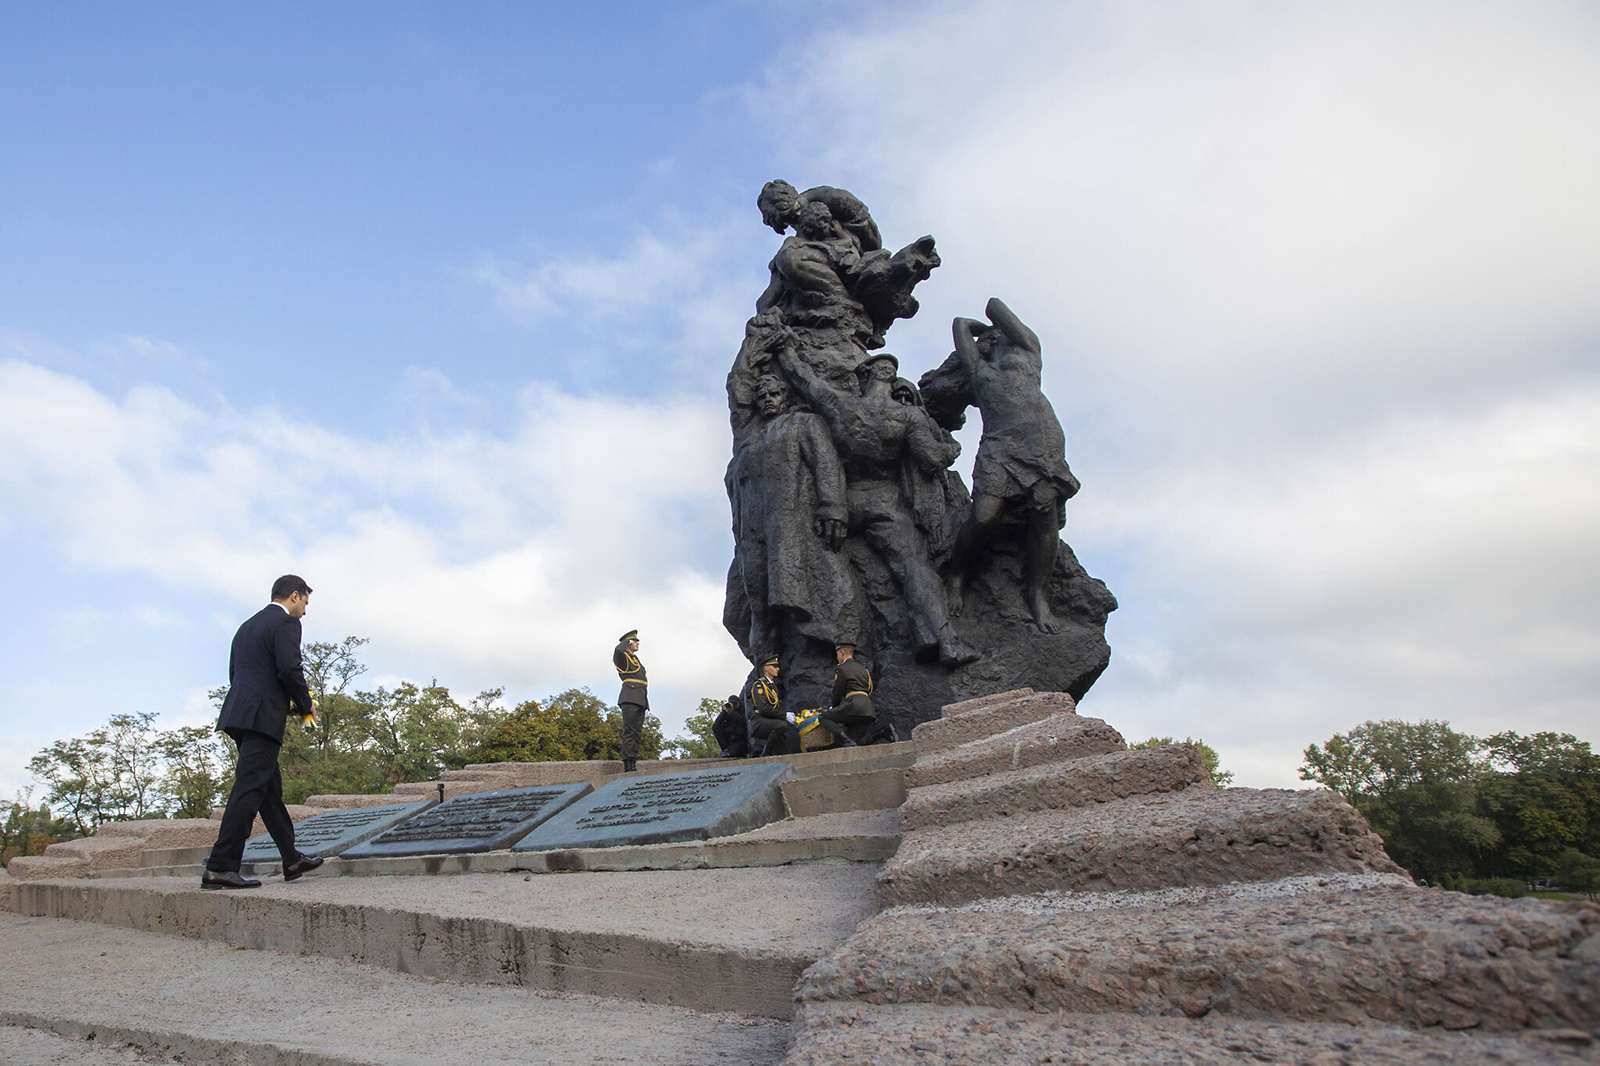 Ukrainian President Volodymyr Zelenskyy attends a ceremony at the monument to Jewish victims of Nazi massacres in Ukraine's capital Kyiv, Wednesday, Sept. 29, 2021. The ceremony commemorated the 80th anniversary of the Nazi massacre of Jews at the Babi Yar ravine, where at least 33,770 Jews were killed over a 48-hour period on Sept. 29, 1941. (Ukrainian Presidential Press Office)